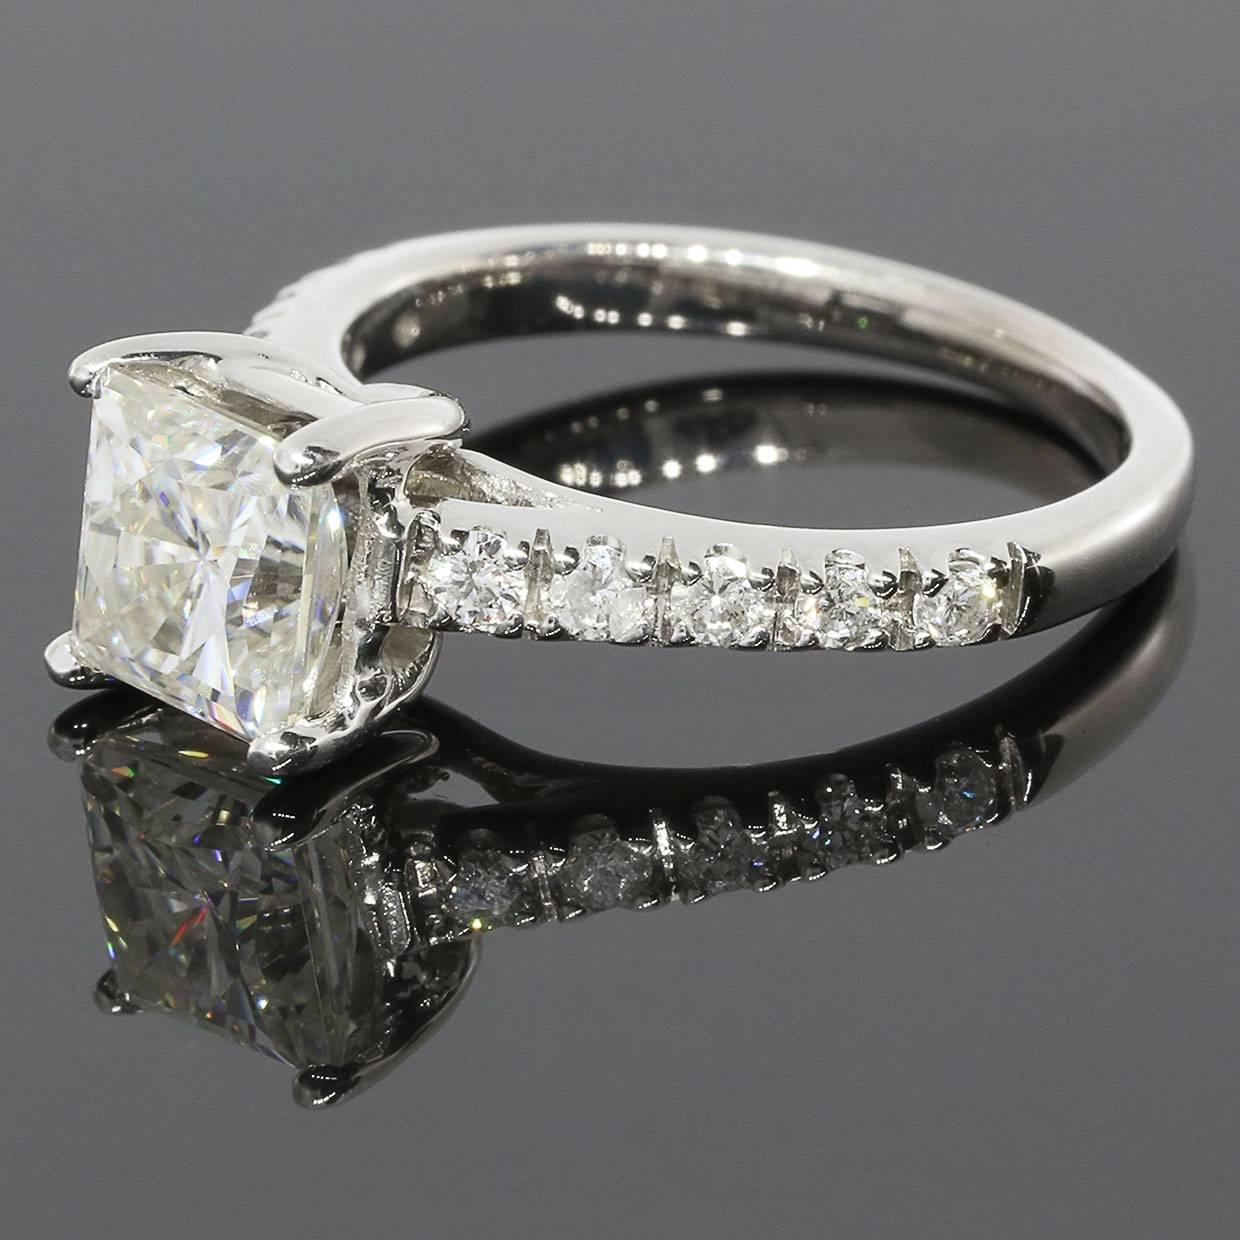 This stunning engagement ring features a beautiful 1.50 carat, 6.5 millimeter, princess cut Moissanite center stone. This Moissanite is a Charles & Colvard Forever Brilliant gemstone. Moissanites are an excellent choice for engagement rings.